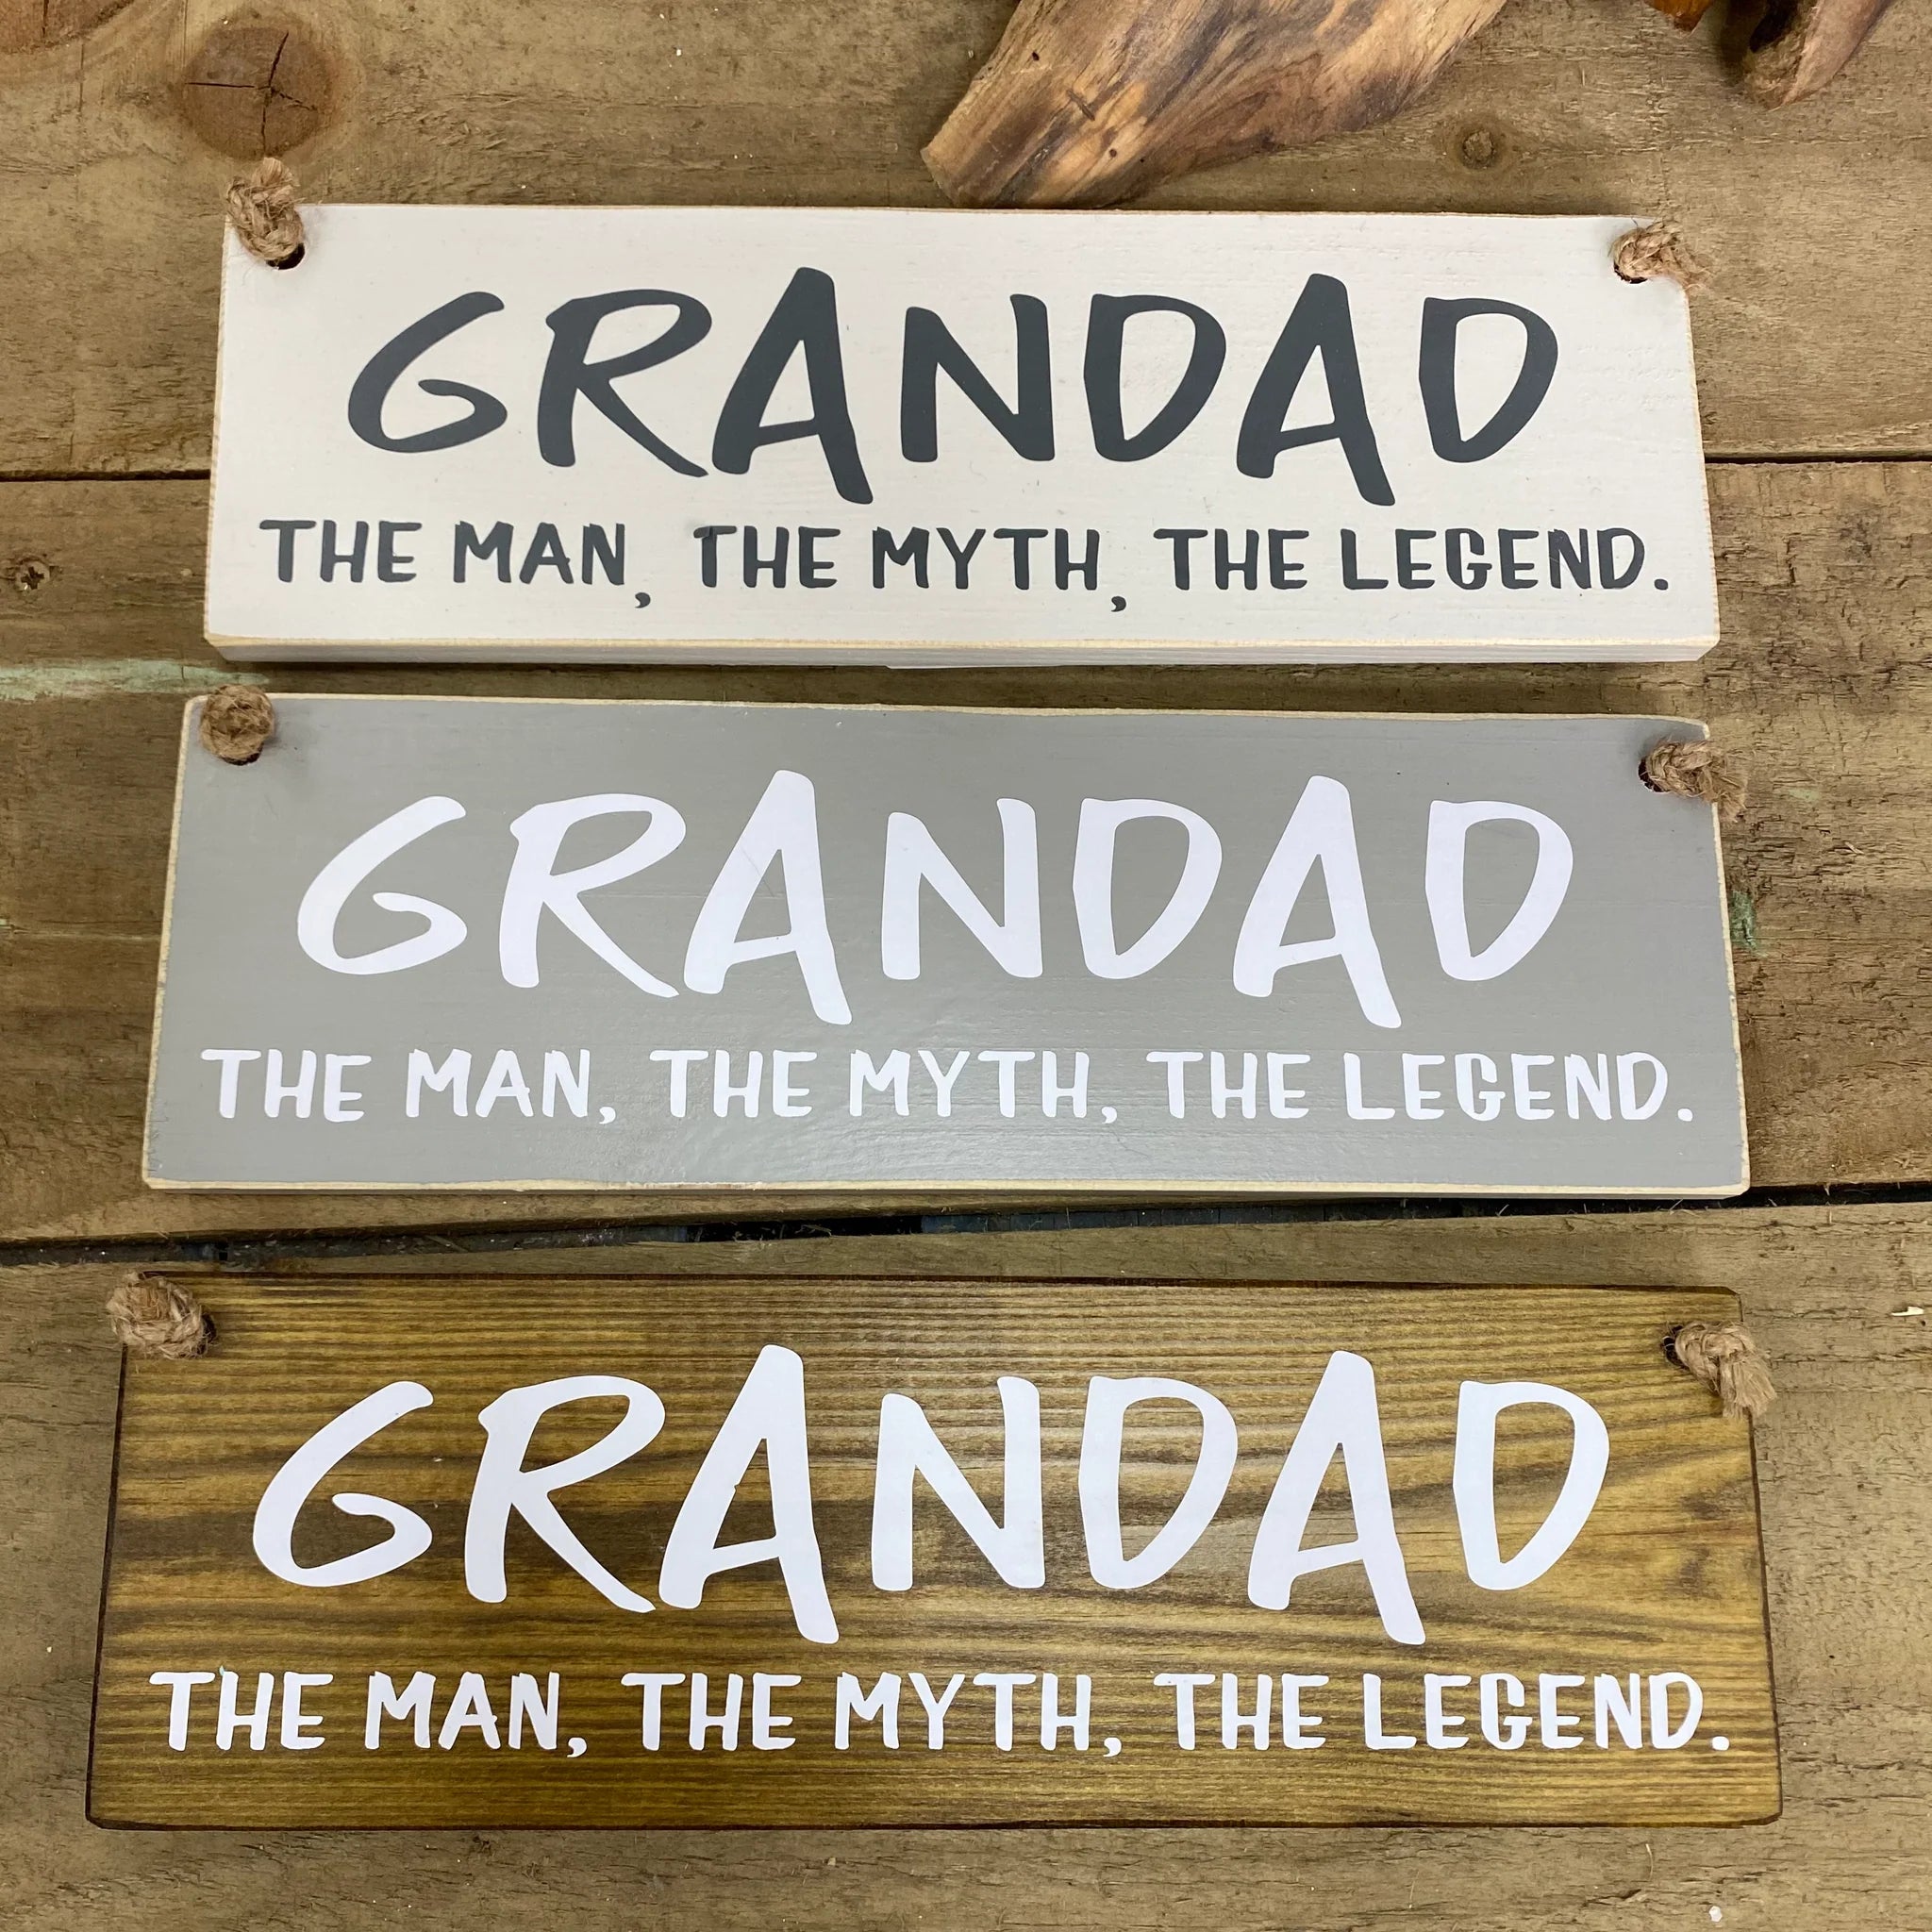 Wooden Hanging Sign - "Grandad - the man, the myth, the legend."